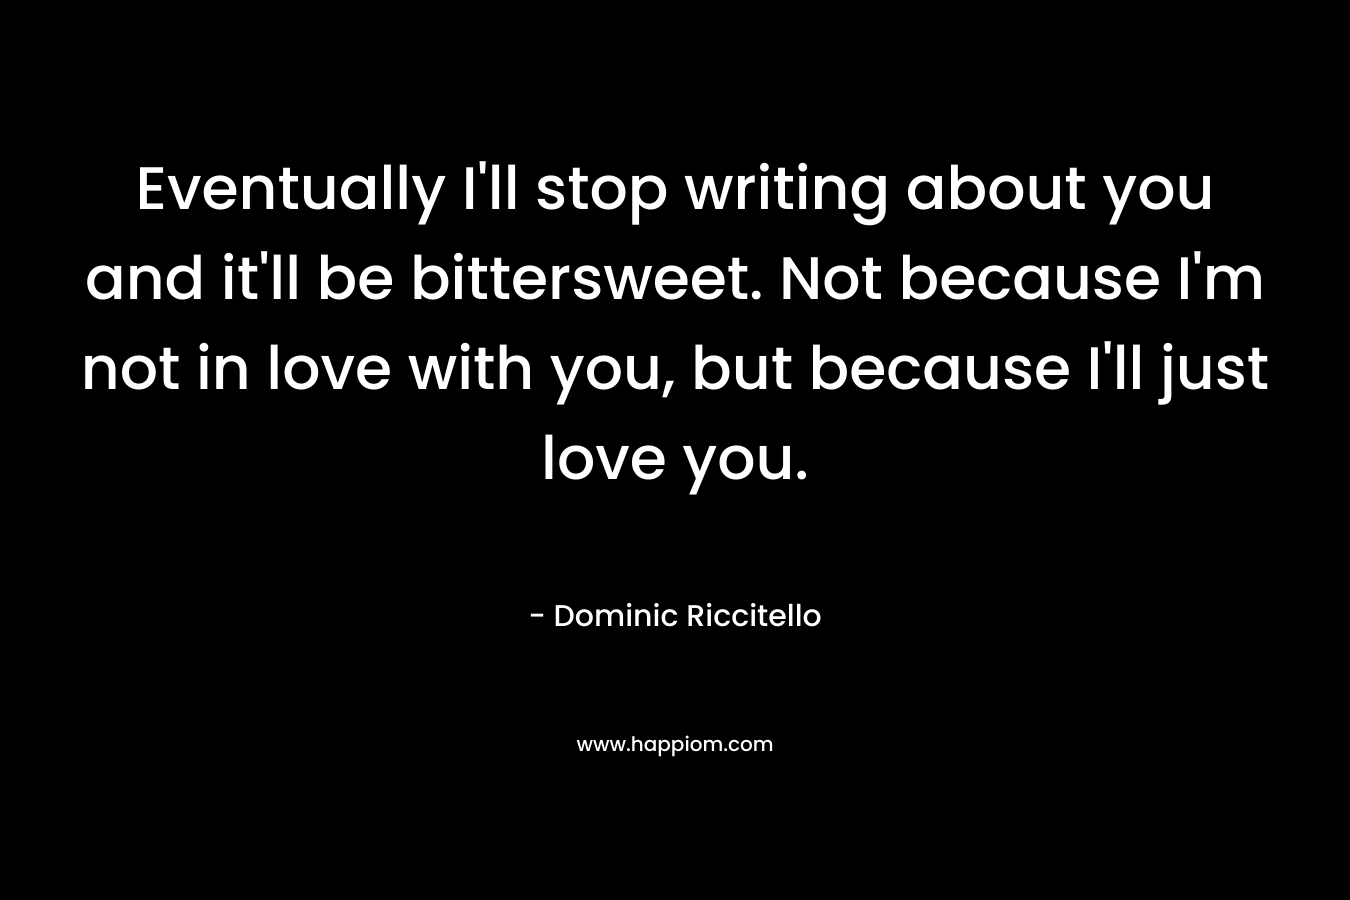 Eventually I’ll stop writing about you and it’ll be bittersweet. Not because I’m not in love with you, but because I’ll just love you. – Dominic Riccitello